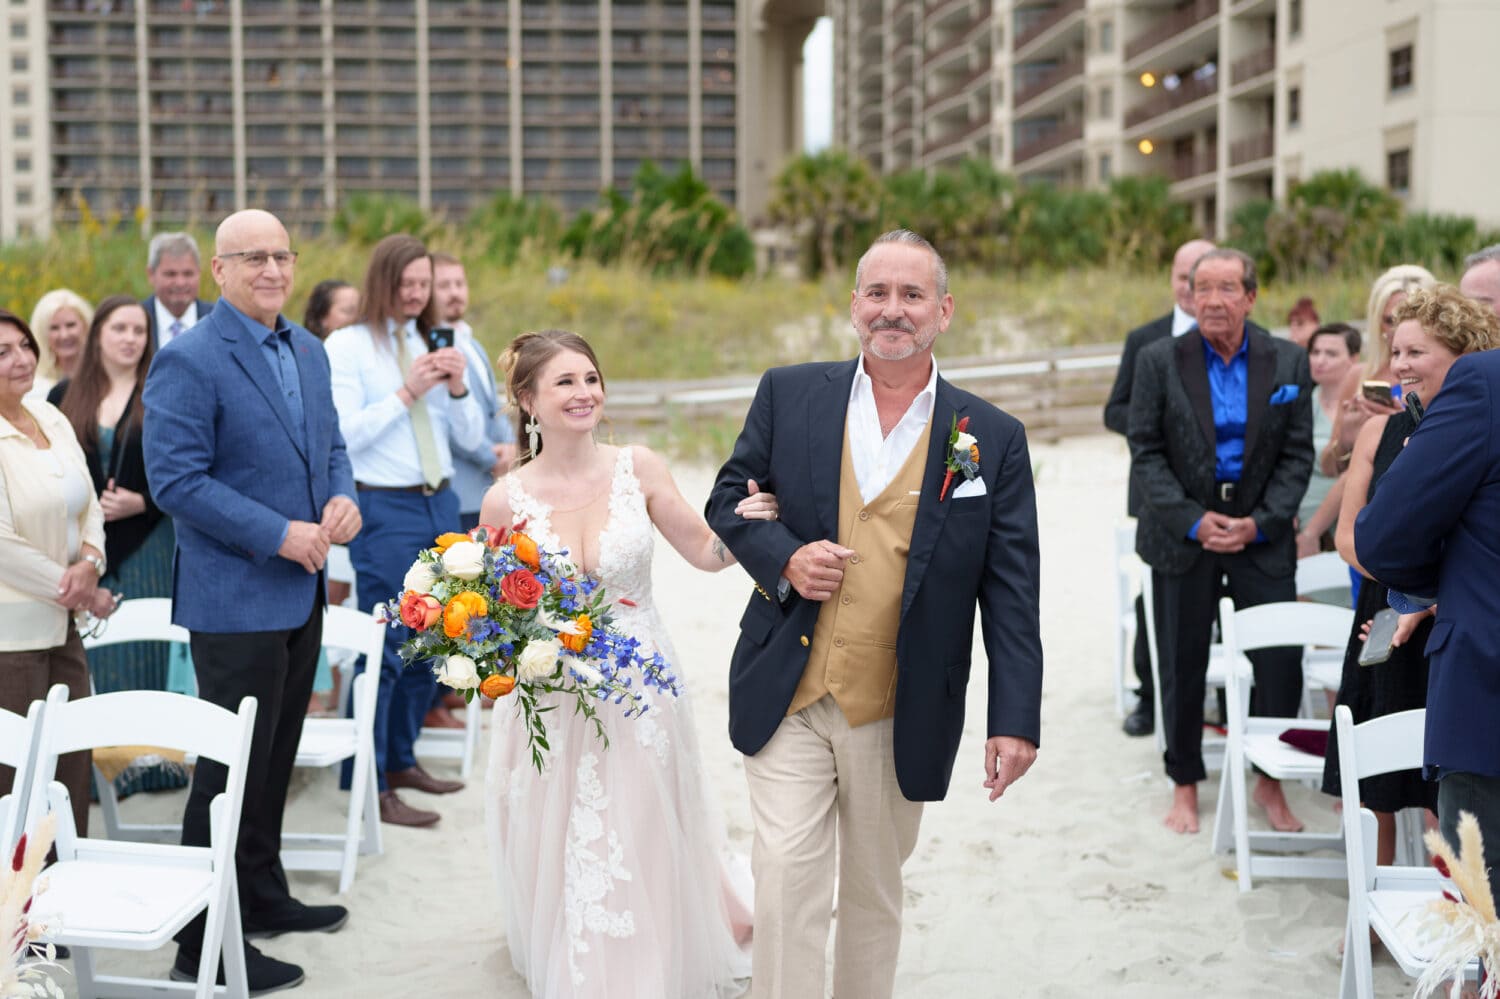 Father walking bride down the aisle - 21 Main Events - North Myrtle Beach